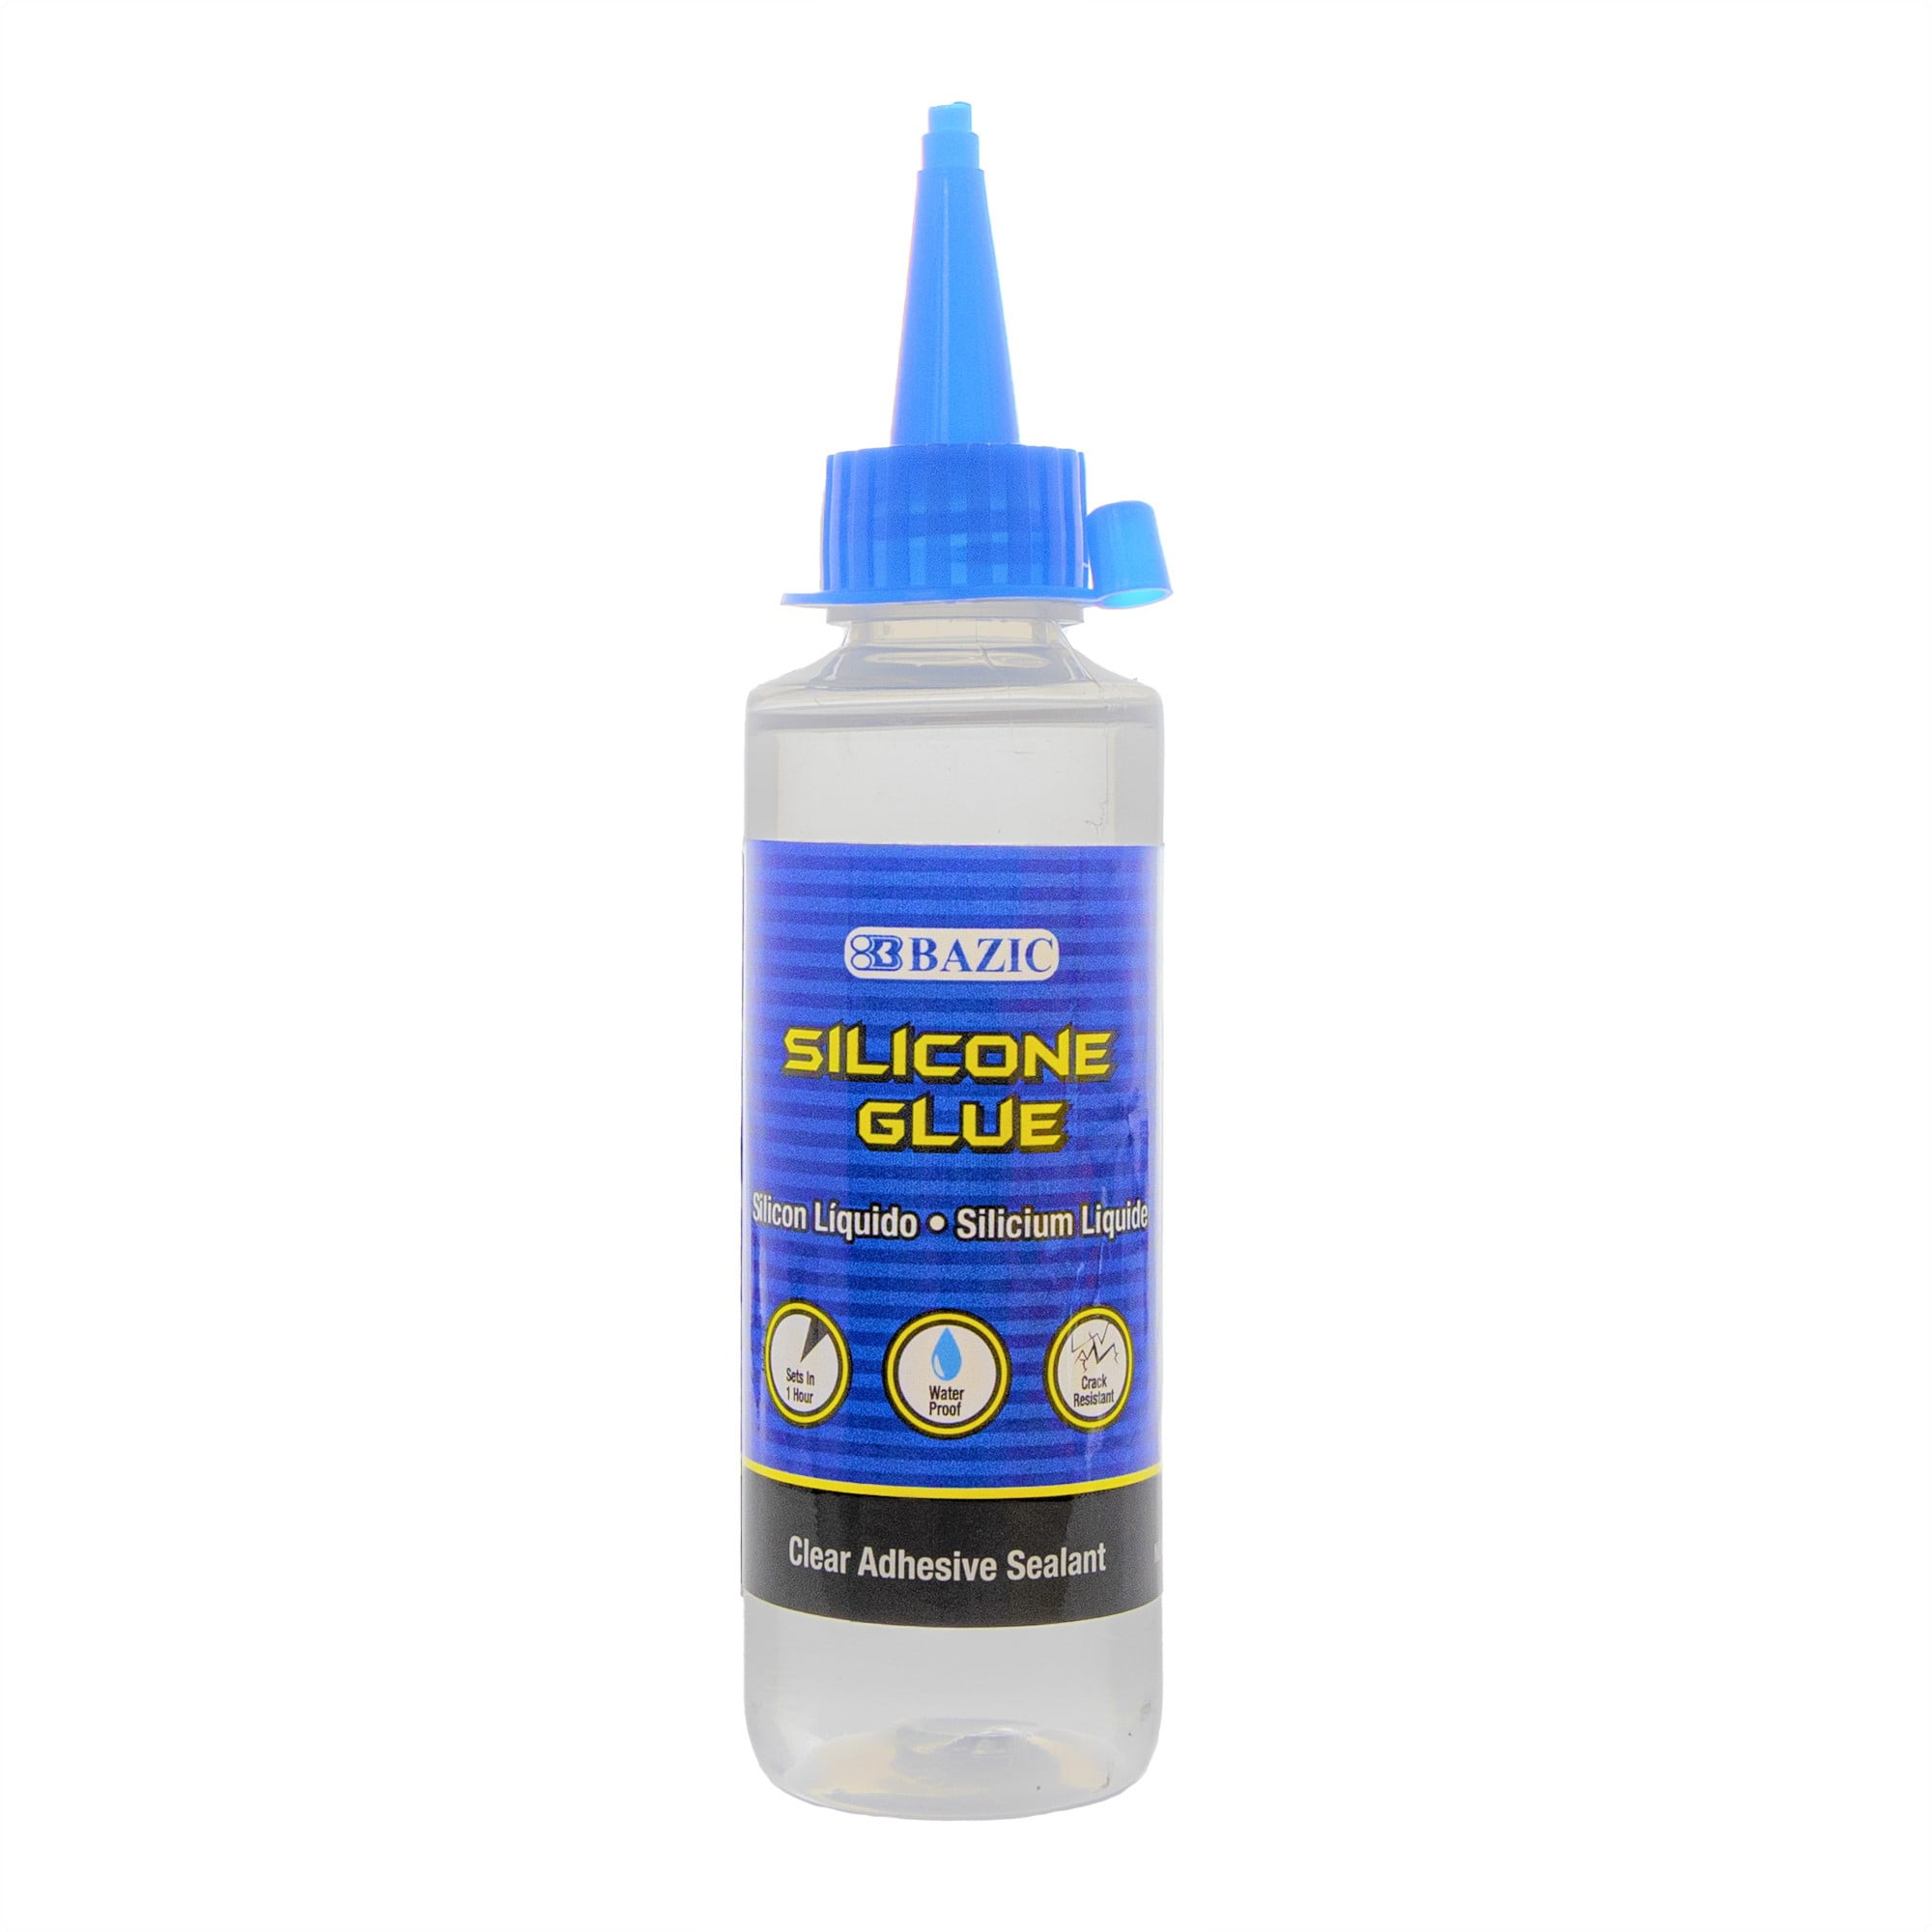 Eclectic E6000 Adhesive Glue, Repositionable Extreme Tack, Clear, 2 fl. oz.